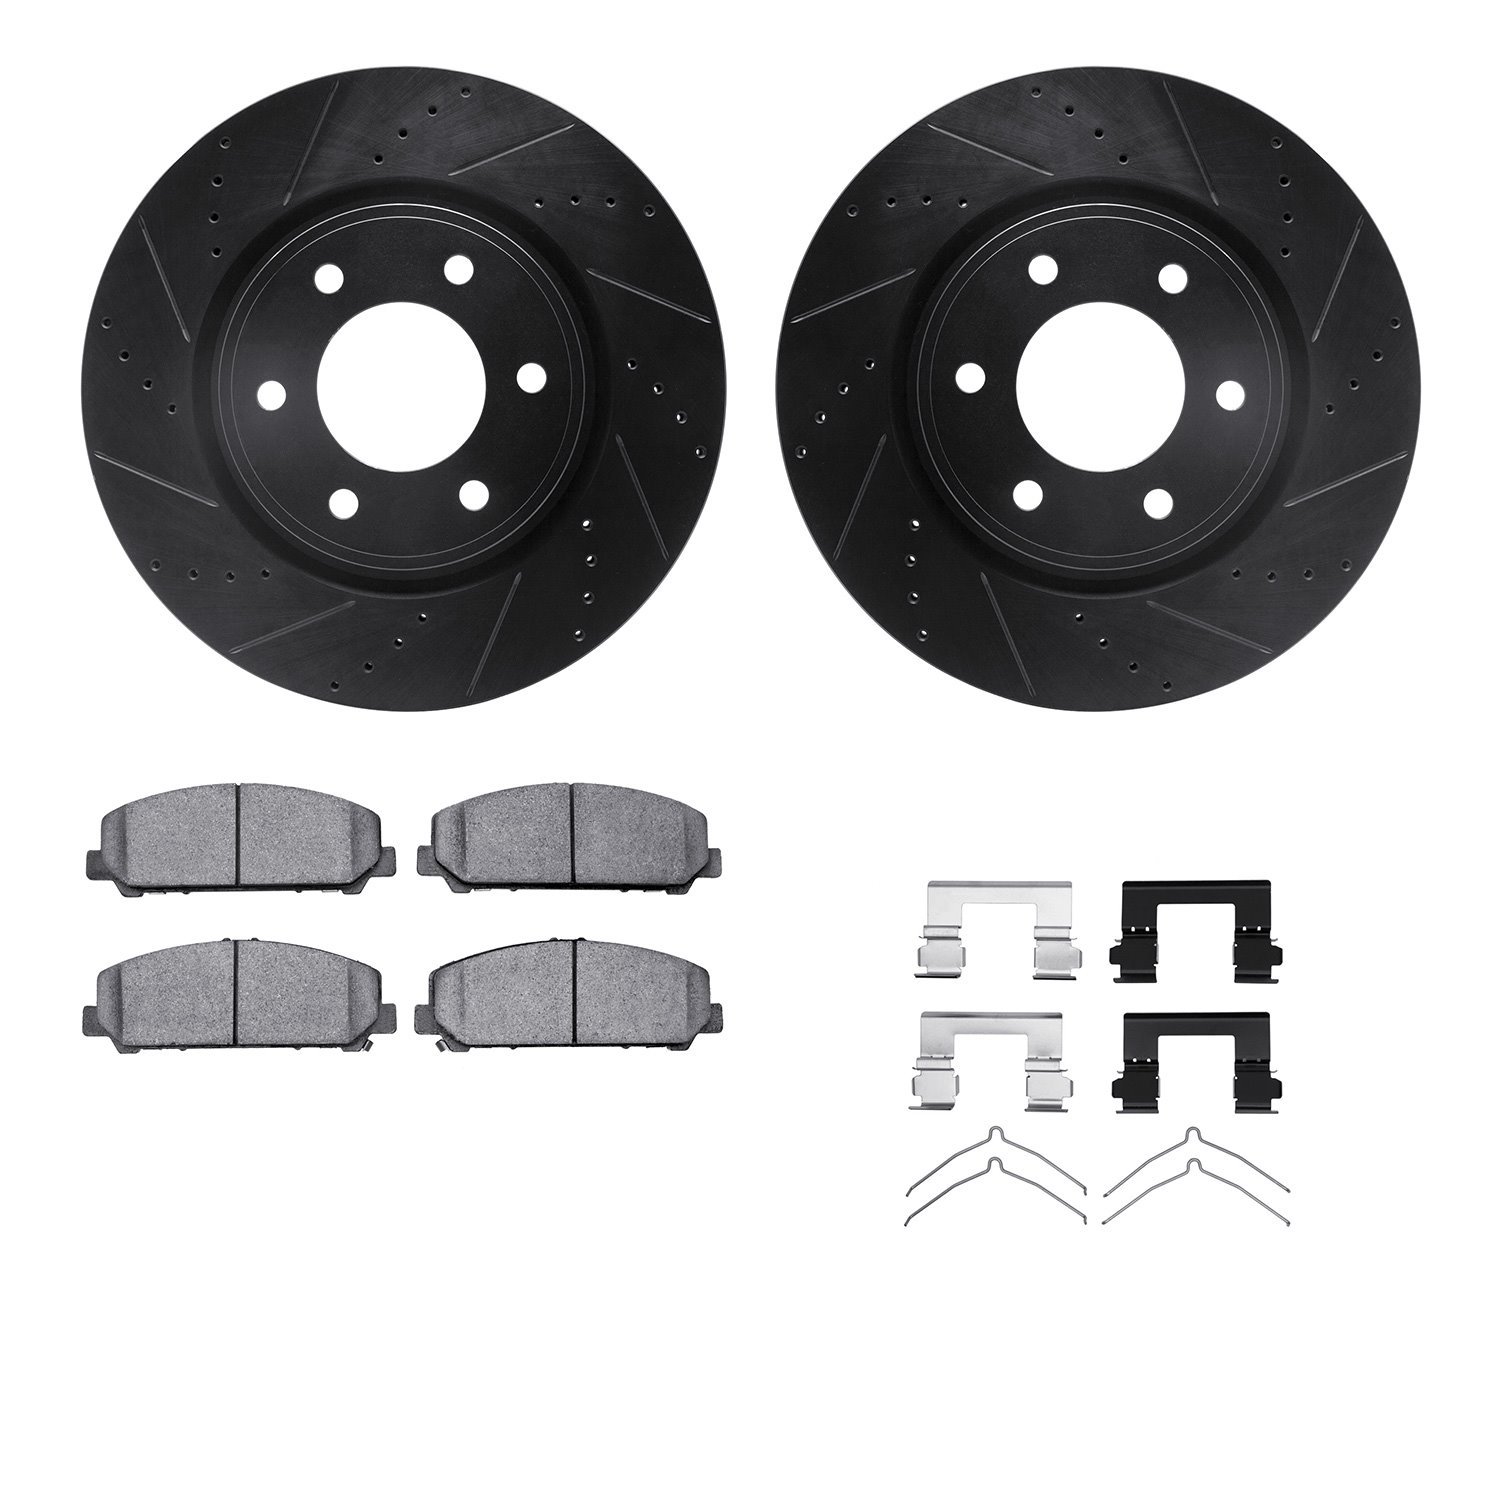 8212-68001 Drilled/Slotted Rotors w/Heavy-Duty Brake Pads Kit & Hardware [Black], Fits Select Infiniti/Nissan, Position: Front